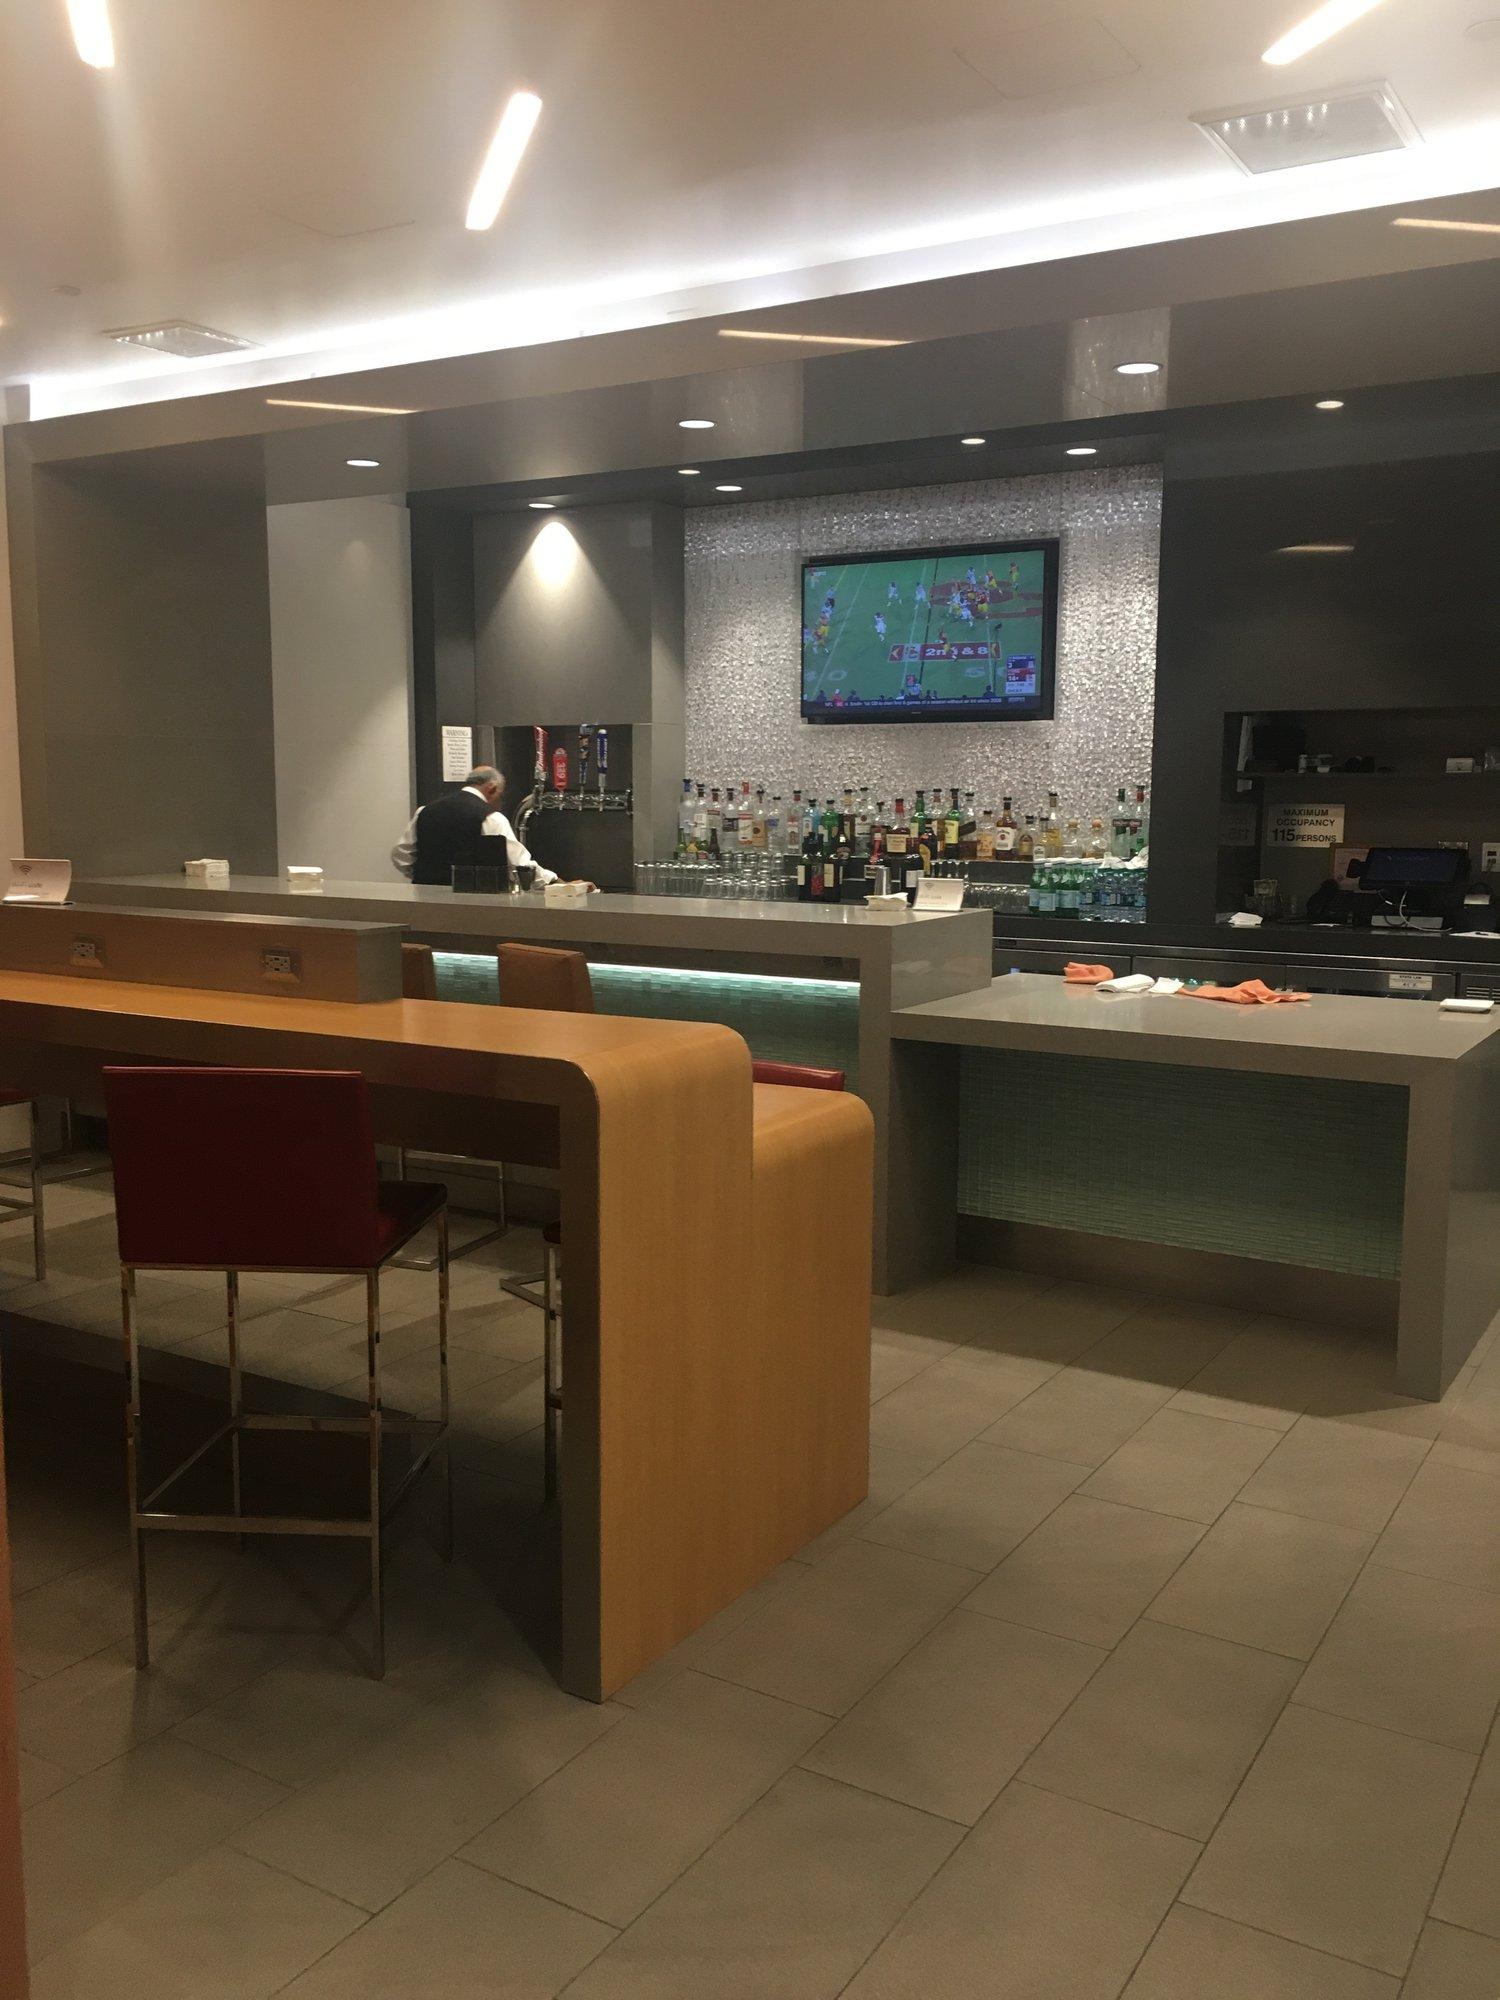 American Airlines Admirals Club image 23 of 43